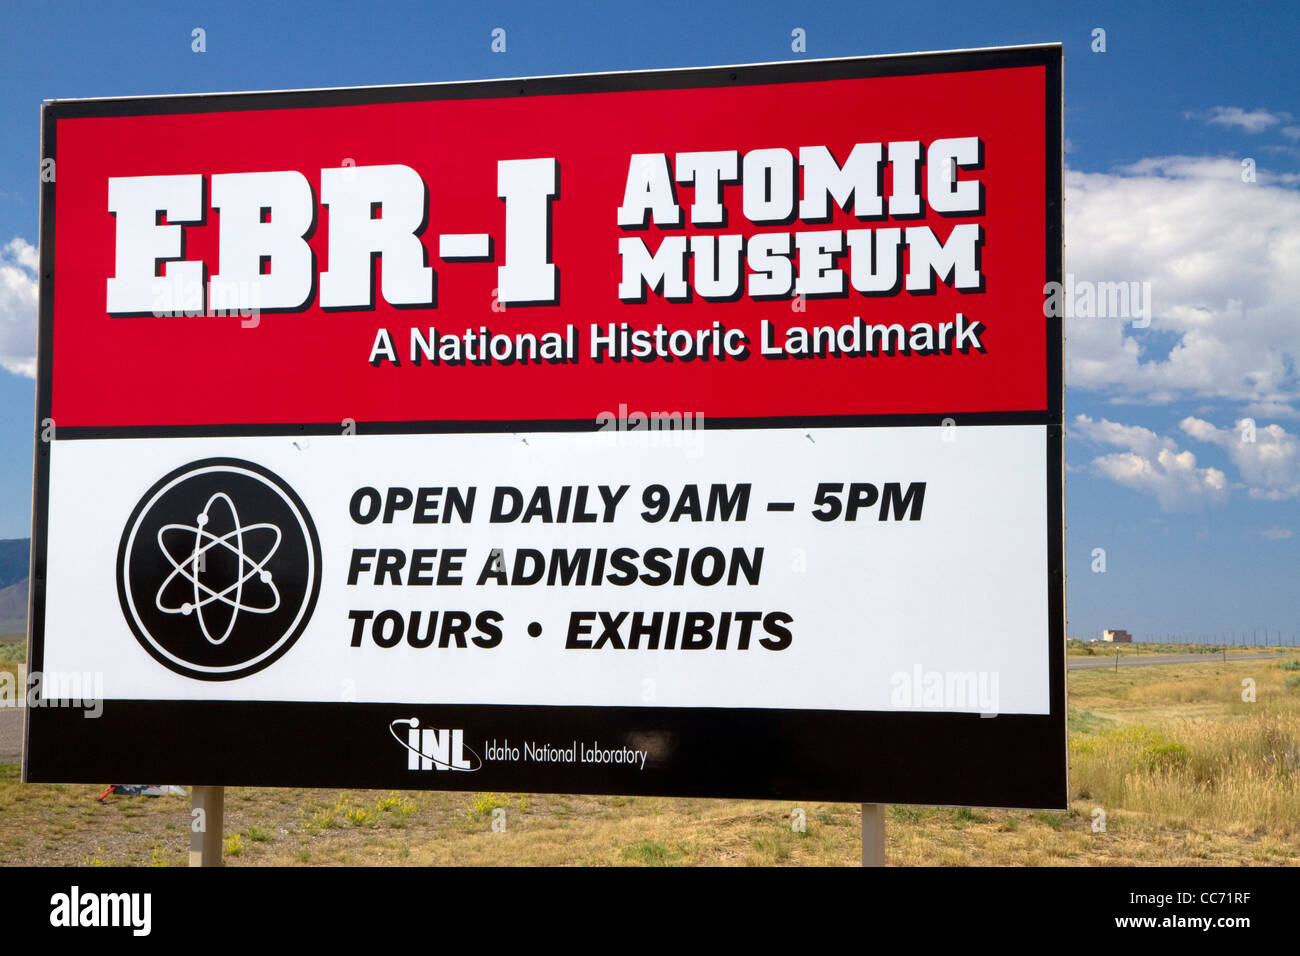 Sign for the EBR-I decommissioned research nuclear reactor atomic museum located in the desert near Arco, Idaho, USA. Stock Photo